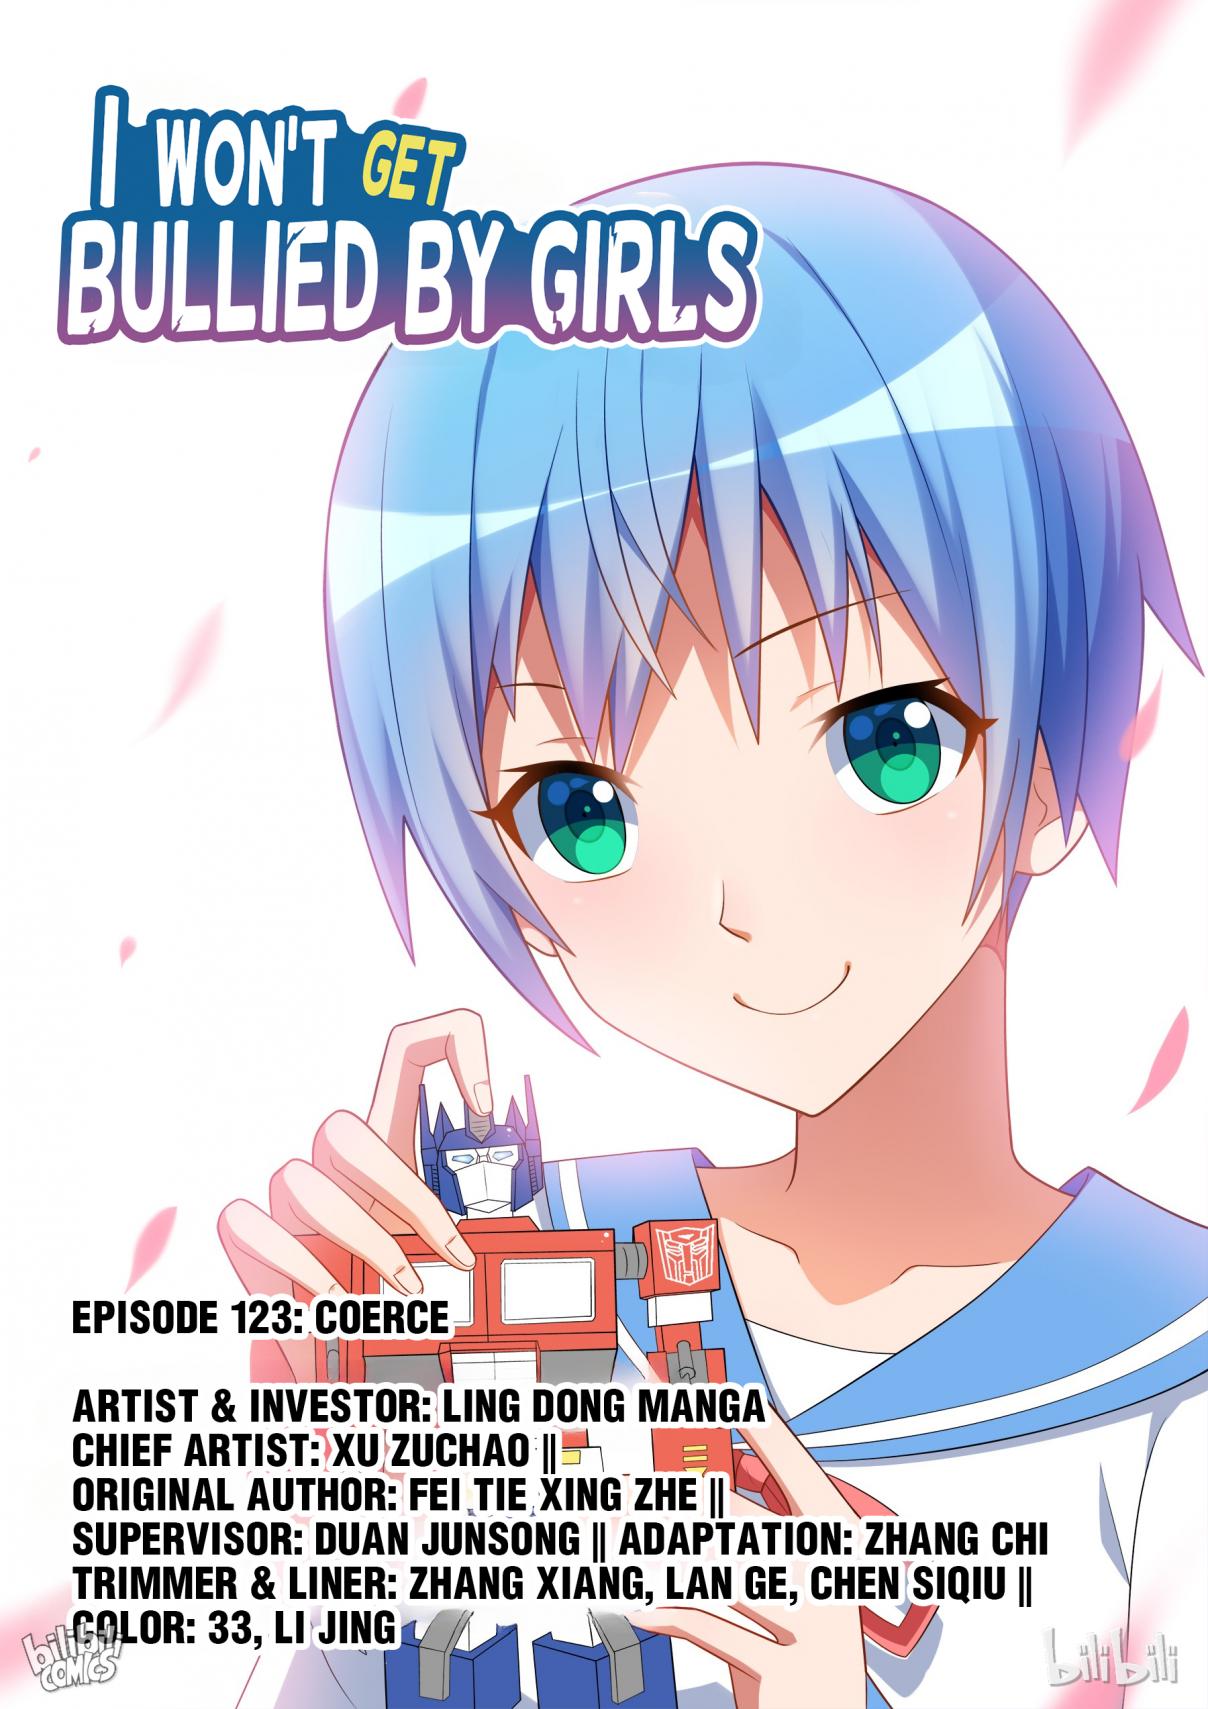 I Don't Want to Be Bullied by Girls 123